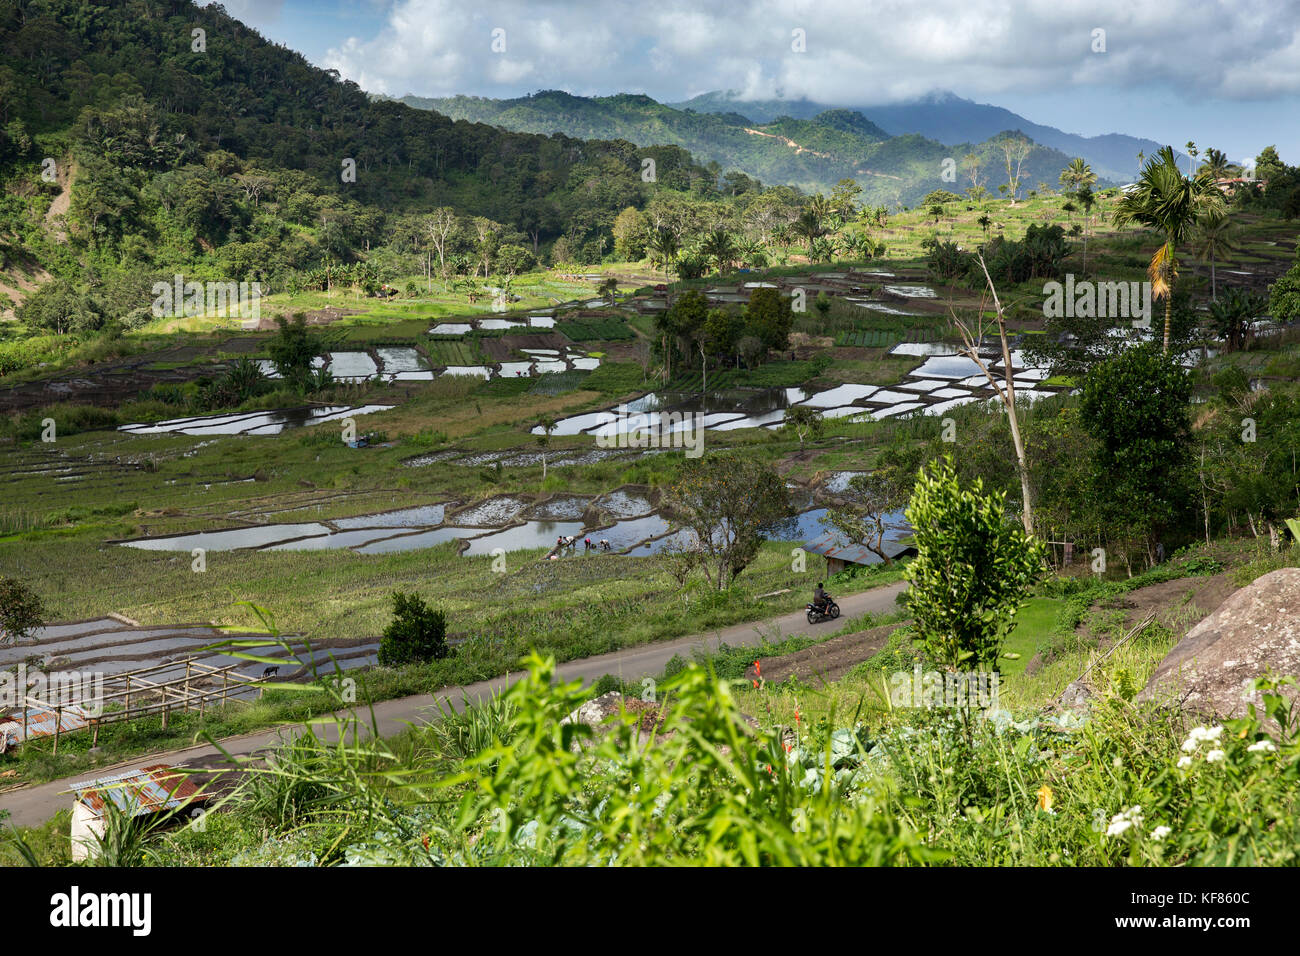 INDONESIA, Flores, a valley filled with planted fields of rice and produce in Waturaka Village Stock Photo